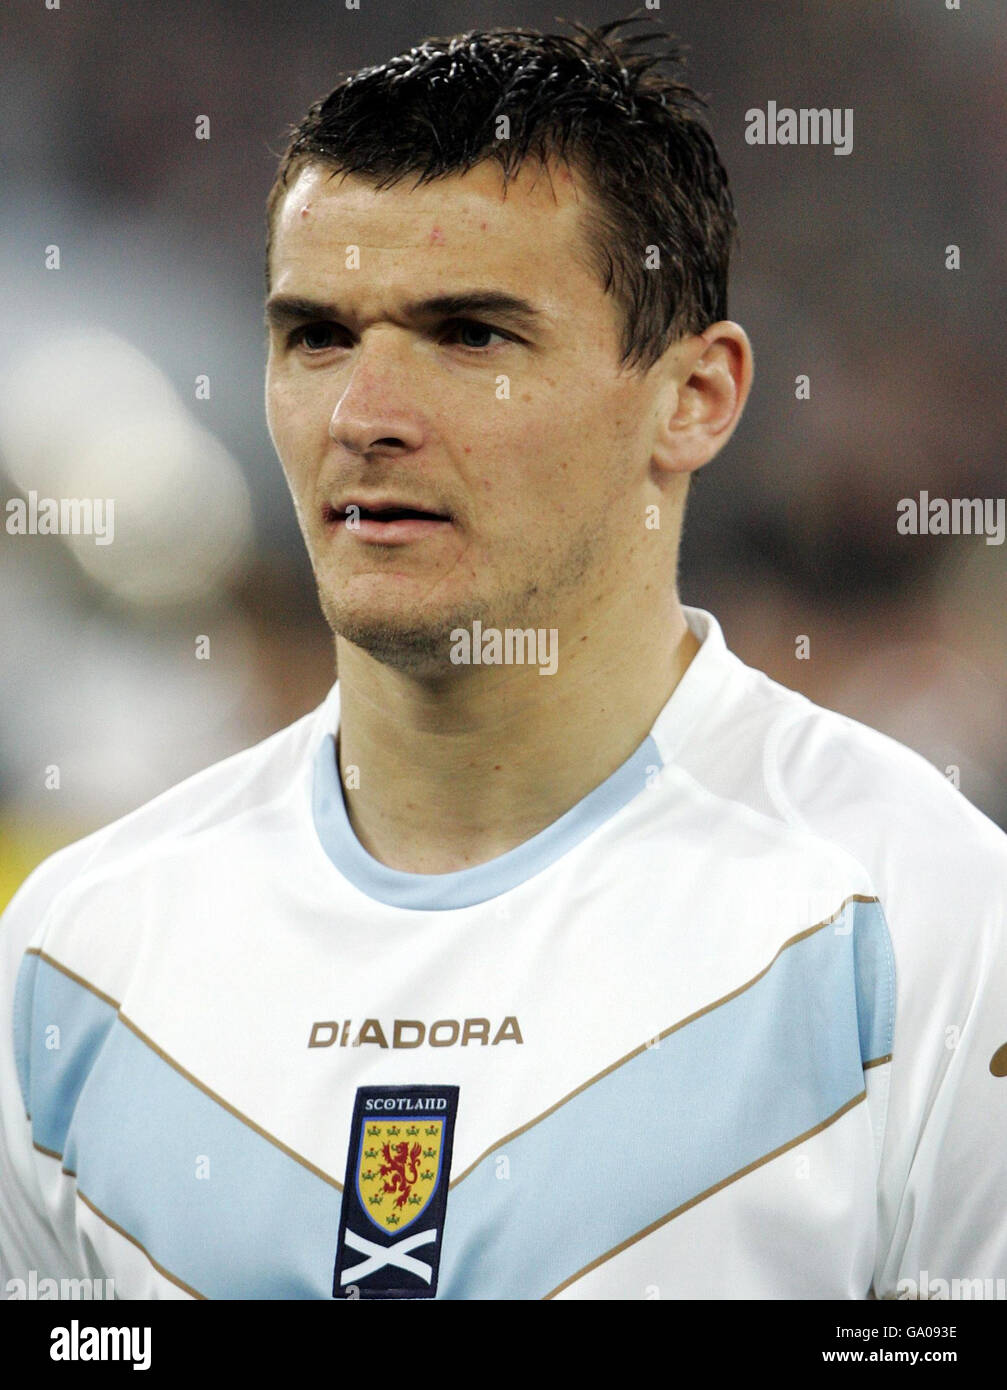 Soccer - Lee McCulloch filer. Library FILER dated 28/03/07 of Scotland's Lee McCulloch. Stock Photo